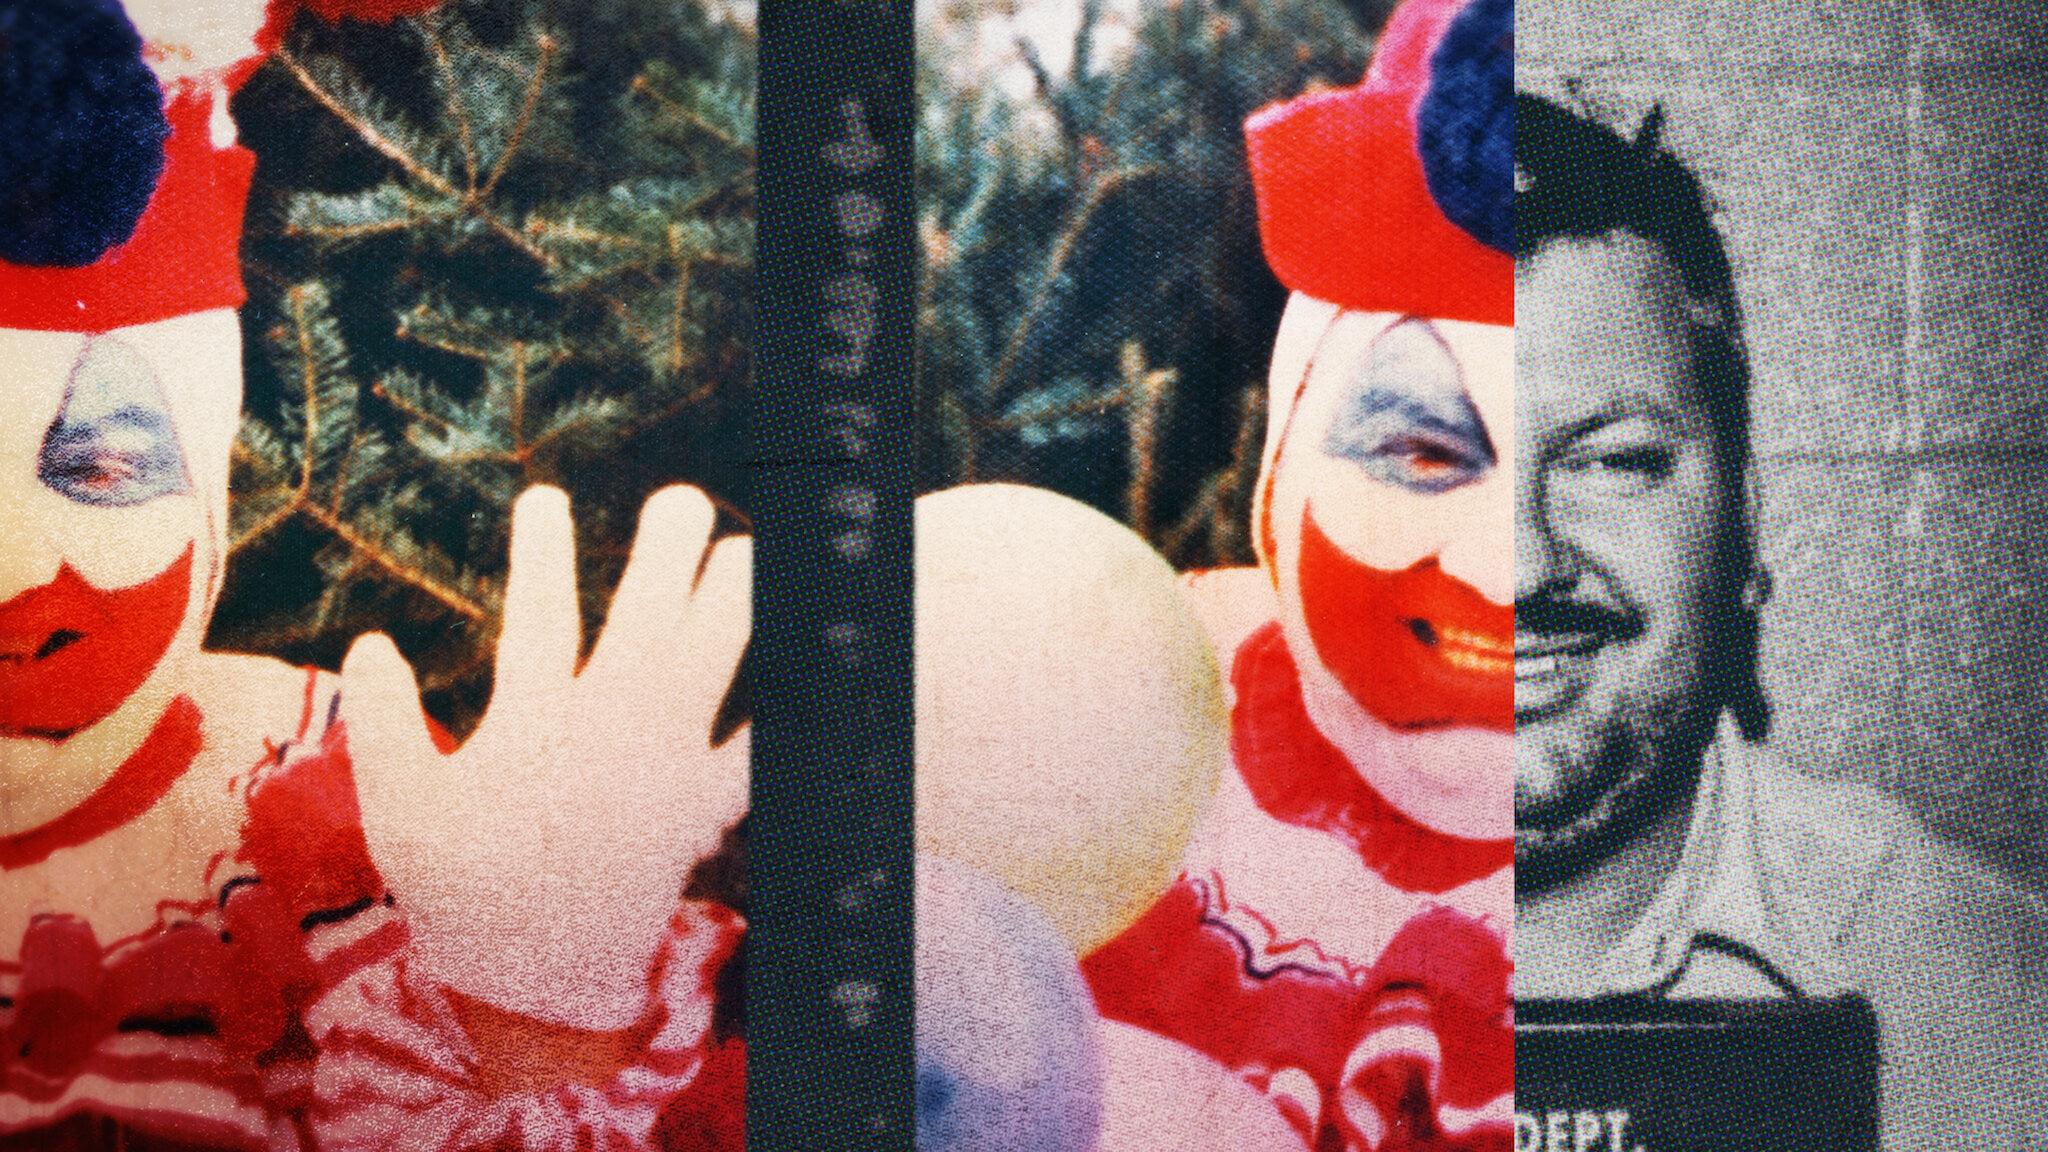 Conversations with a Killer: The John Wayne Gacy Tapes backdrop